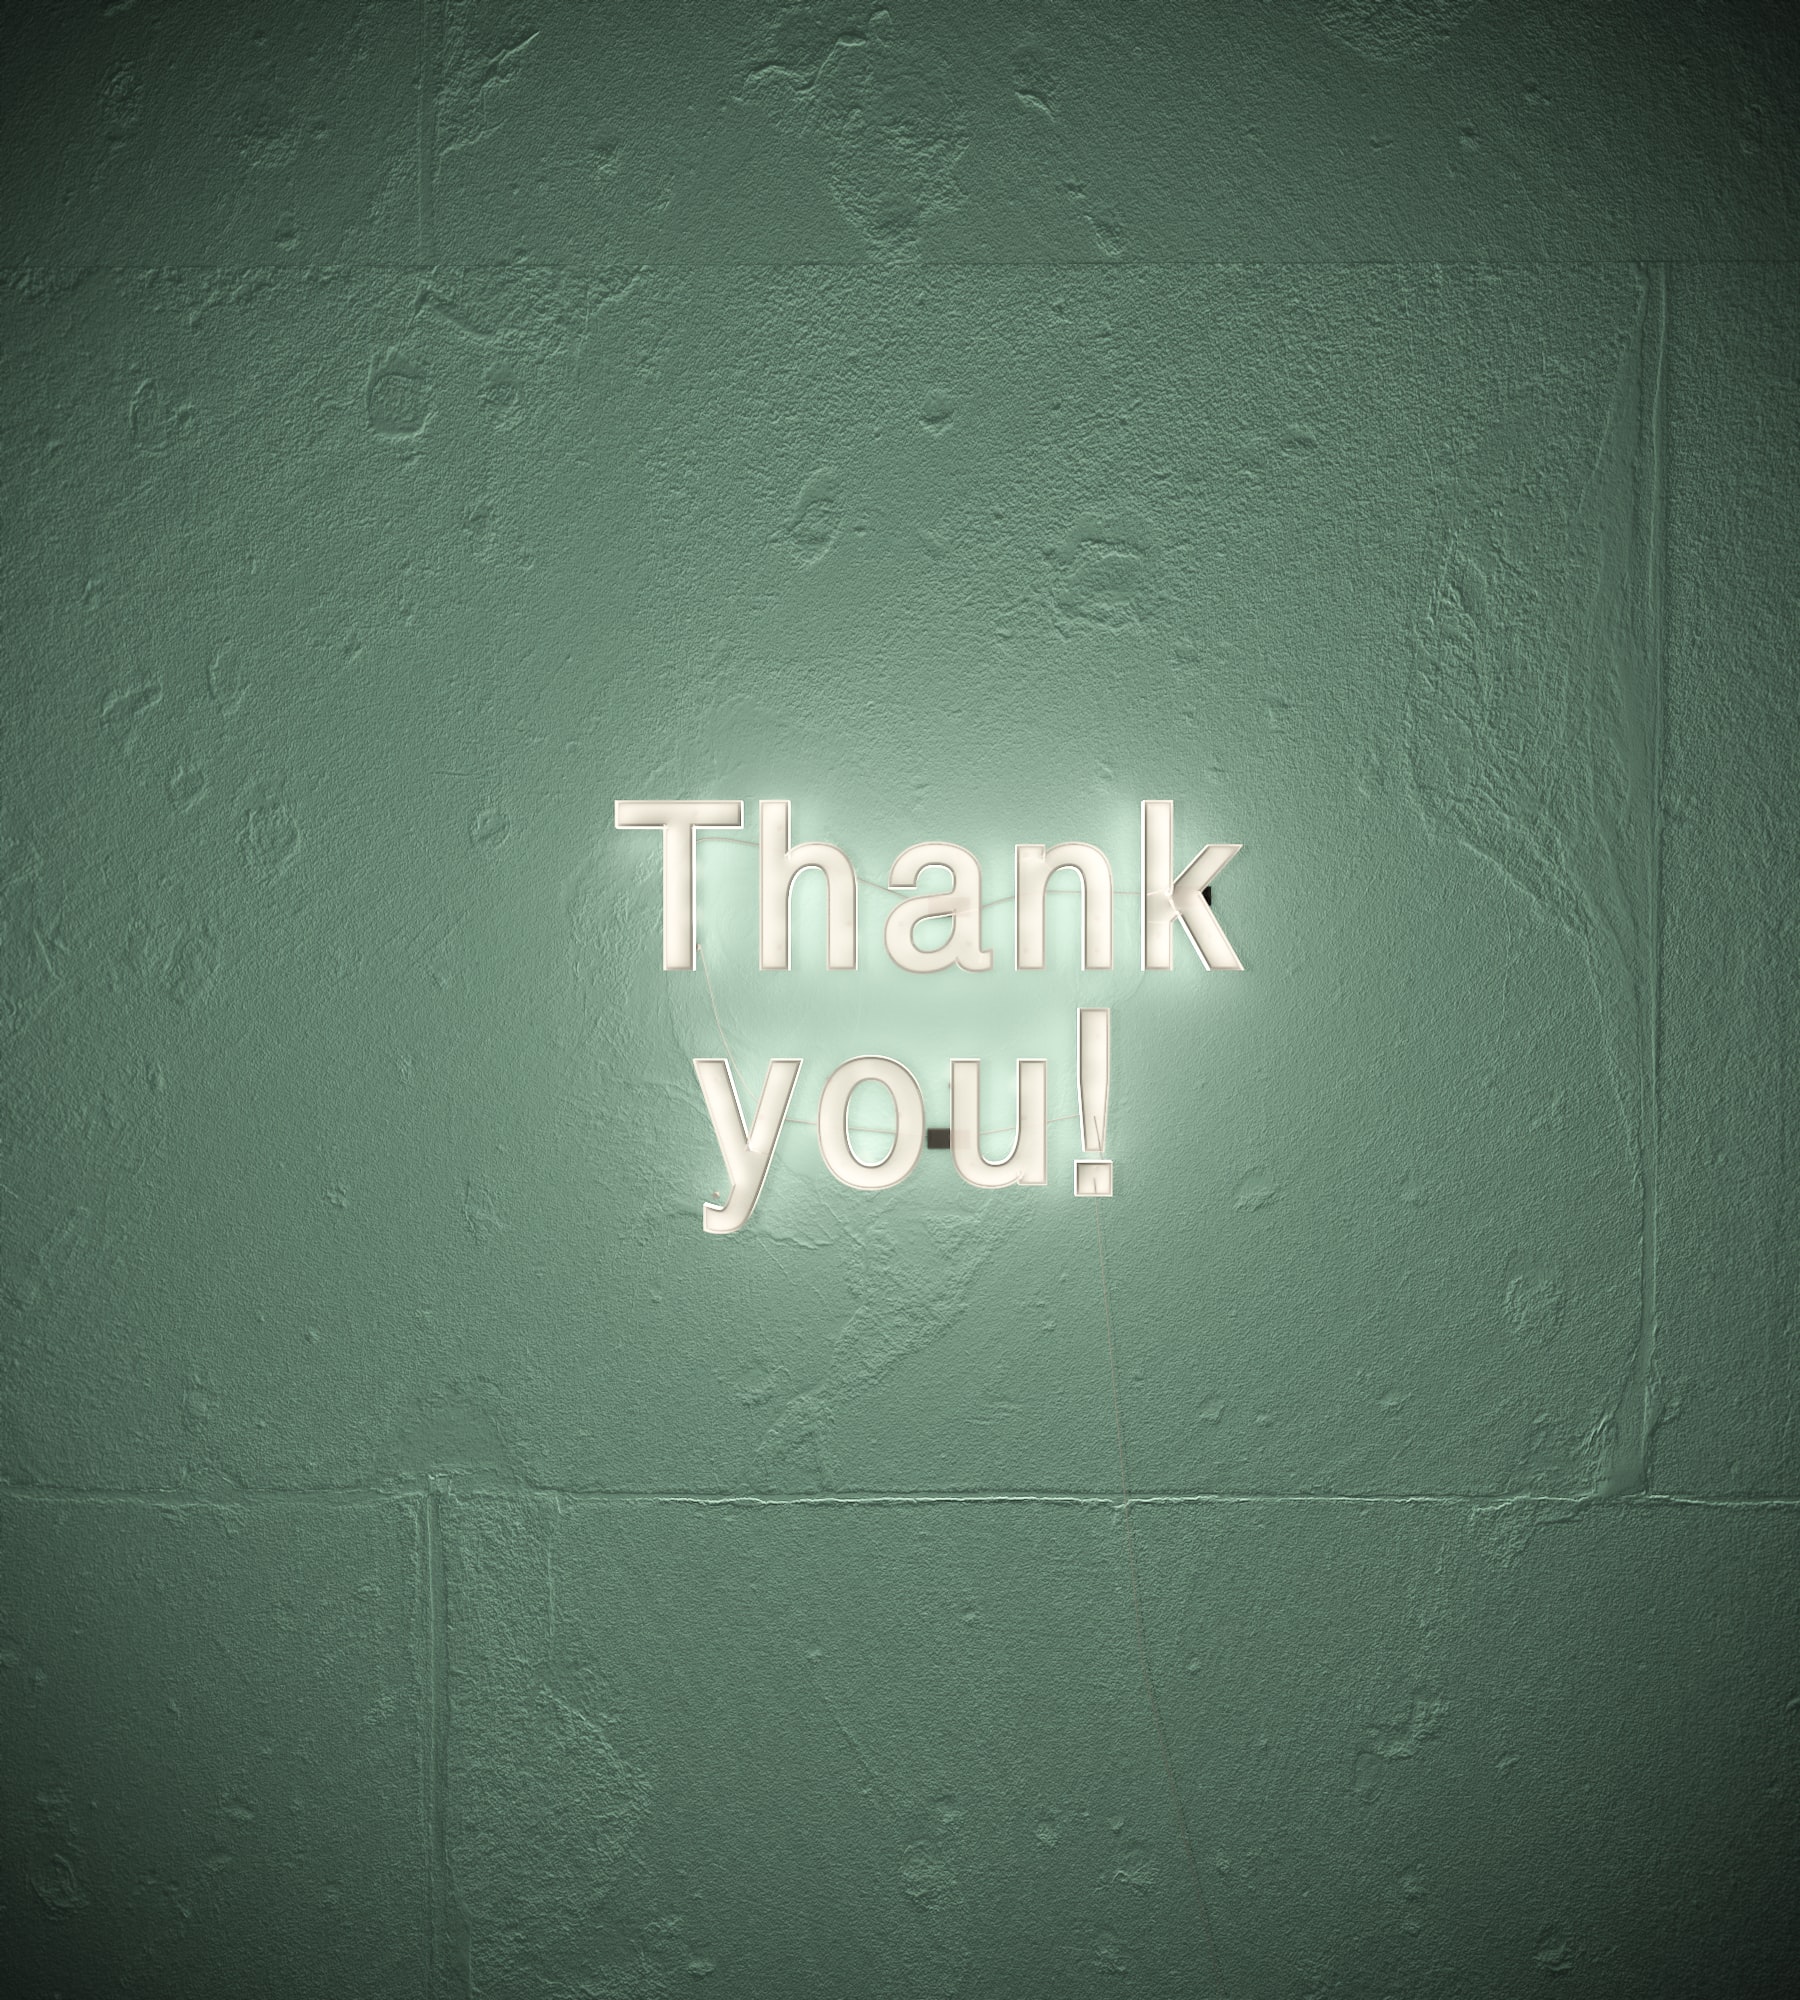 Thank you in neonlights